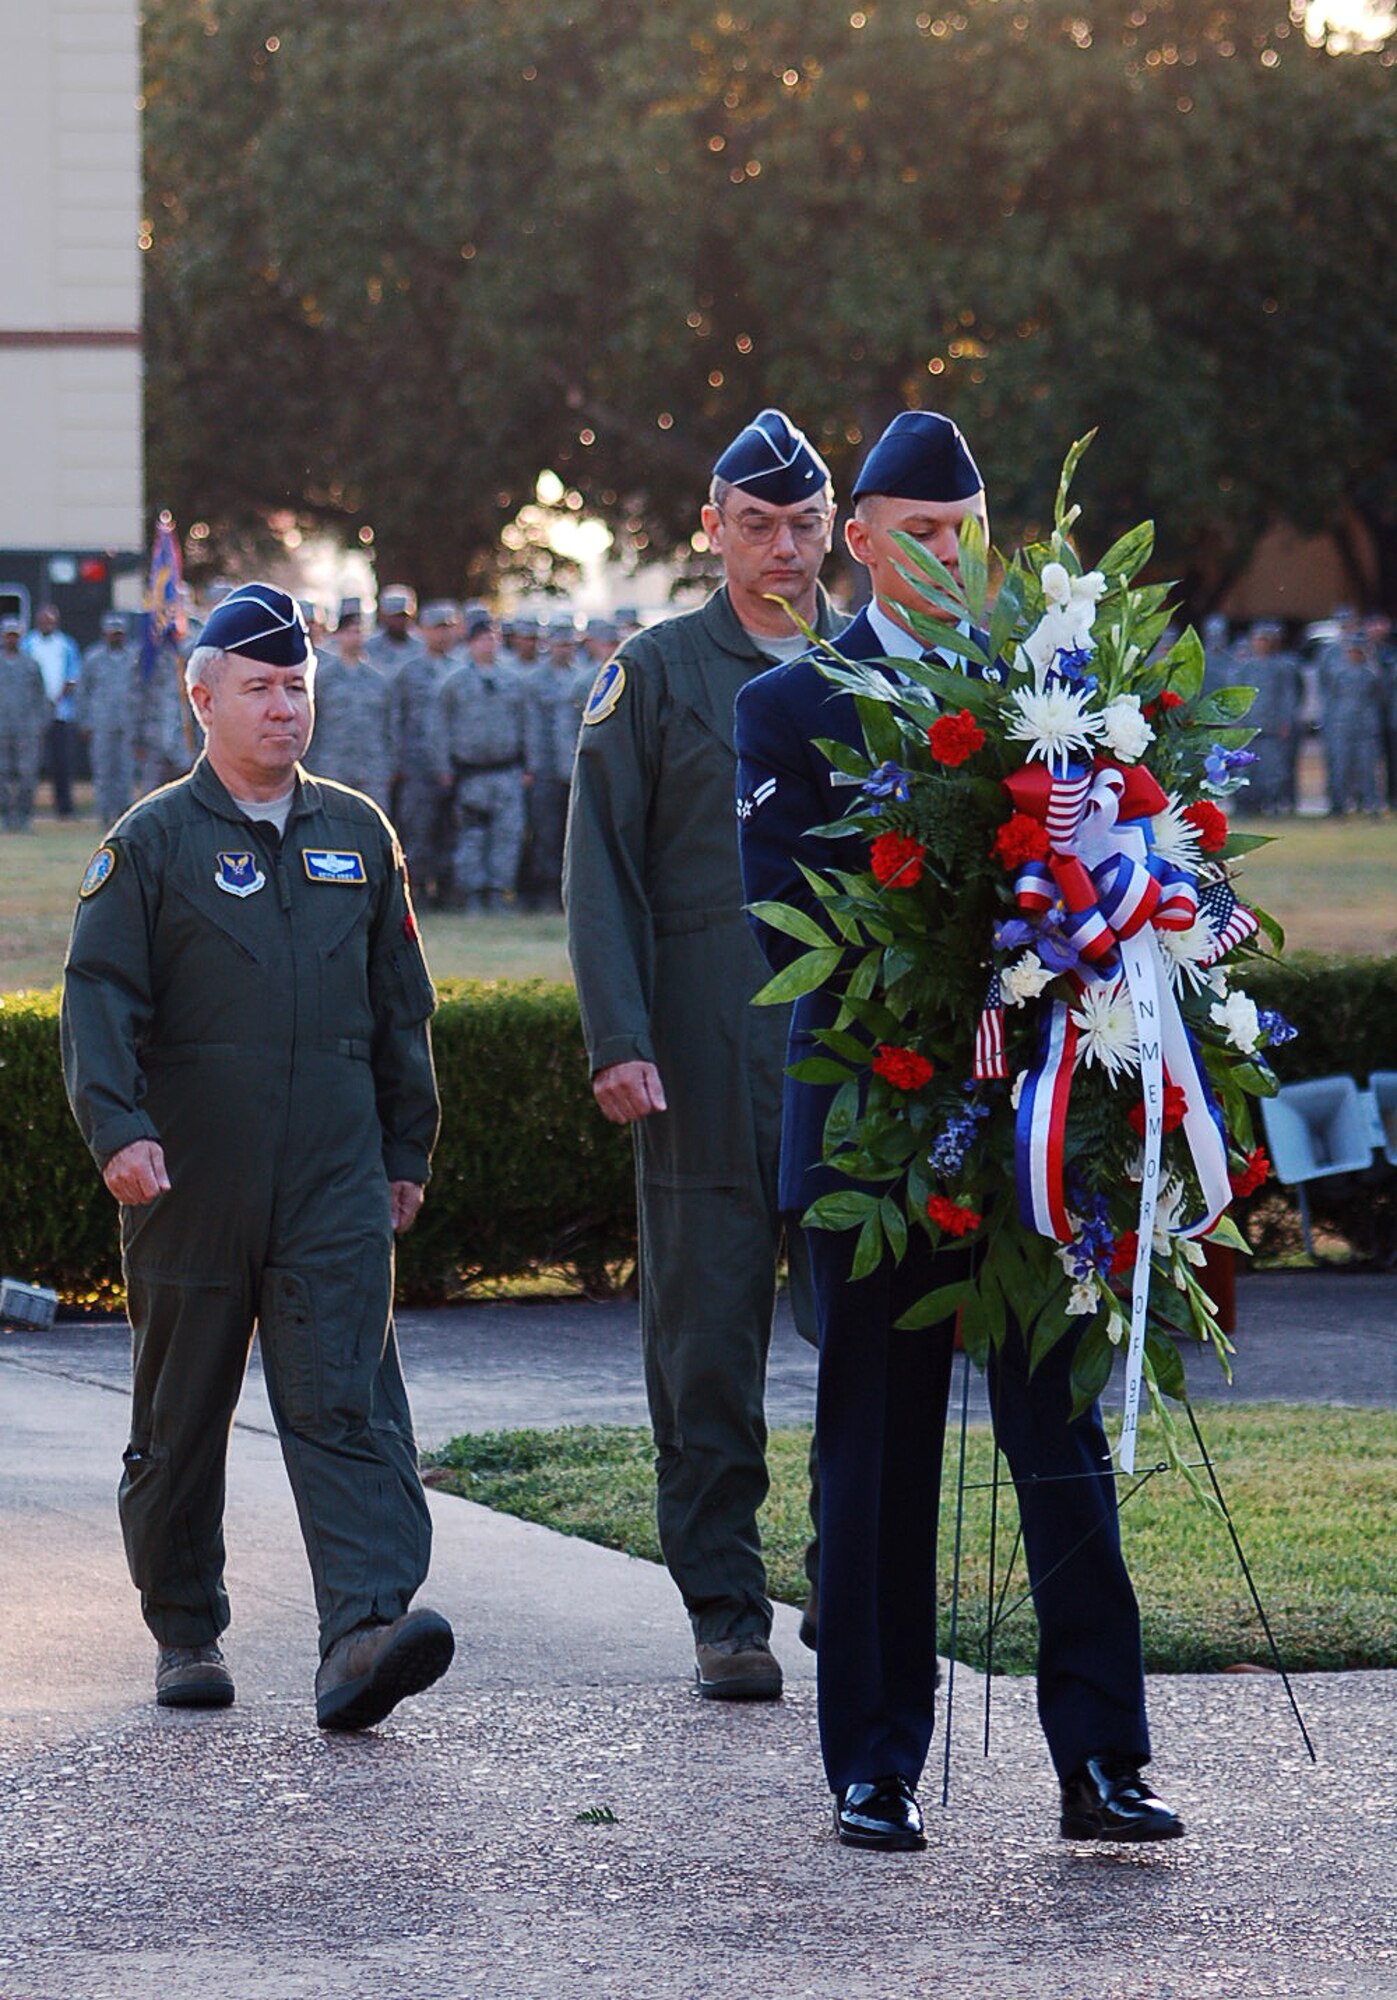 BARKSDALE AIR FORCE BASE, La. – Brig. Gens. Keith Kries, mobilization assistant to the Eighth Air Force commander, and John Mooney III, 307th Bomb Wing commander, walk to place a memorial wreath at the base of the 2nd Bomb Wing Headquarters flag pole during a 9/11 Reveille and Wreath Laying Ceremony on Barksdale Air Force Base Sept. 9, 2011. The ceremony included a moment of silence, which allowed Barksdale Airmen to reflect upon the tragic losses of Sept. 11, 2001, as well as the service and sacrifices made combating terrorism since that fateful day. (U.S. Air Force photo by Maj. Richard Komurek)